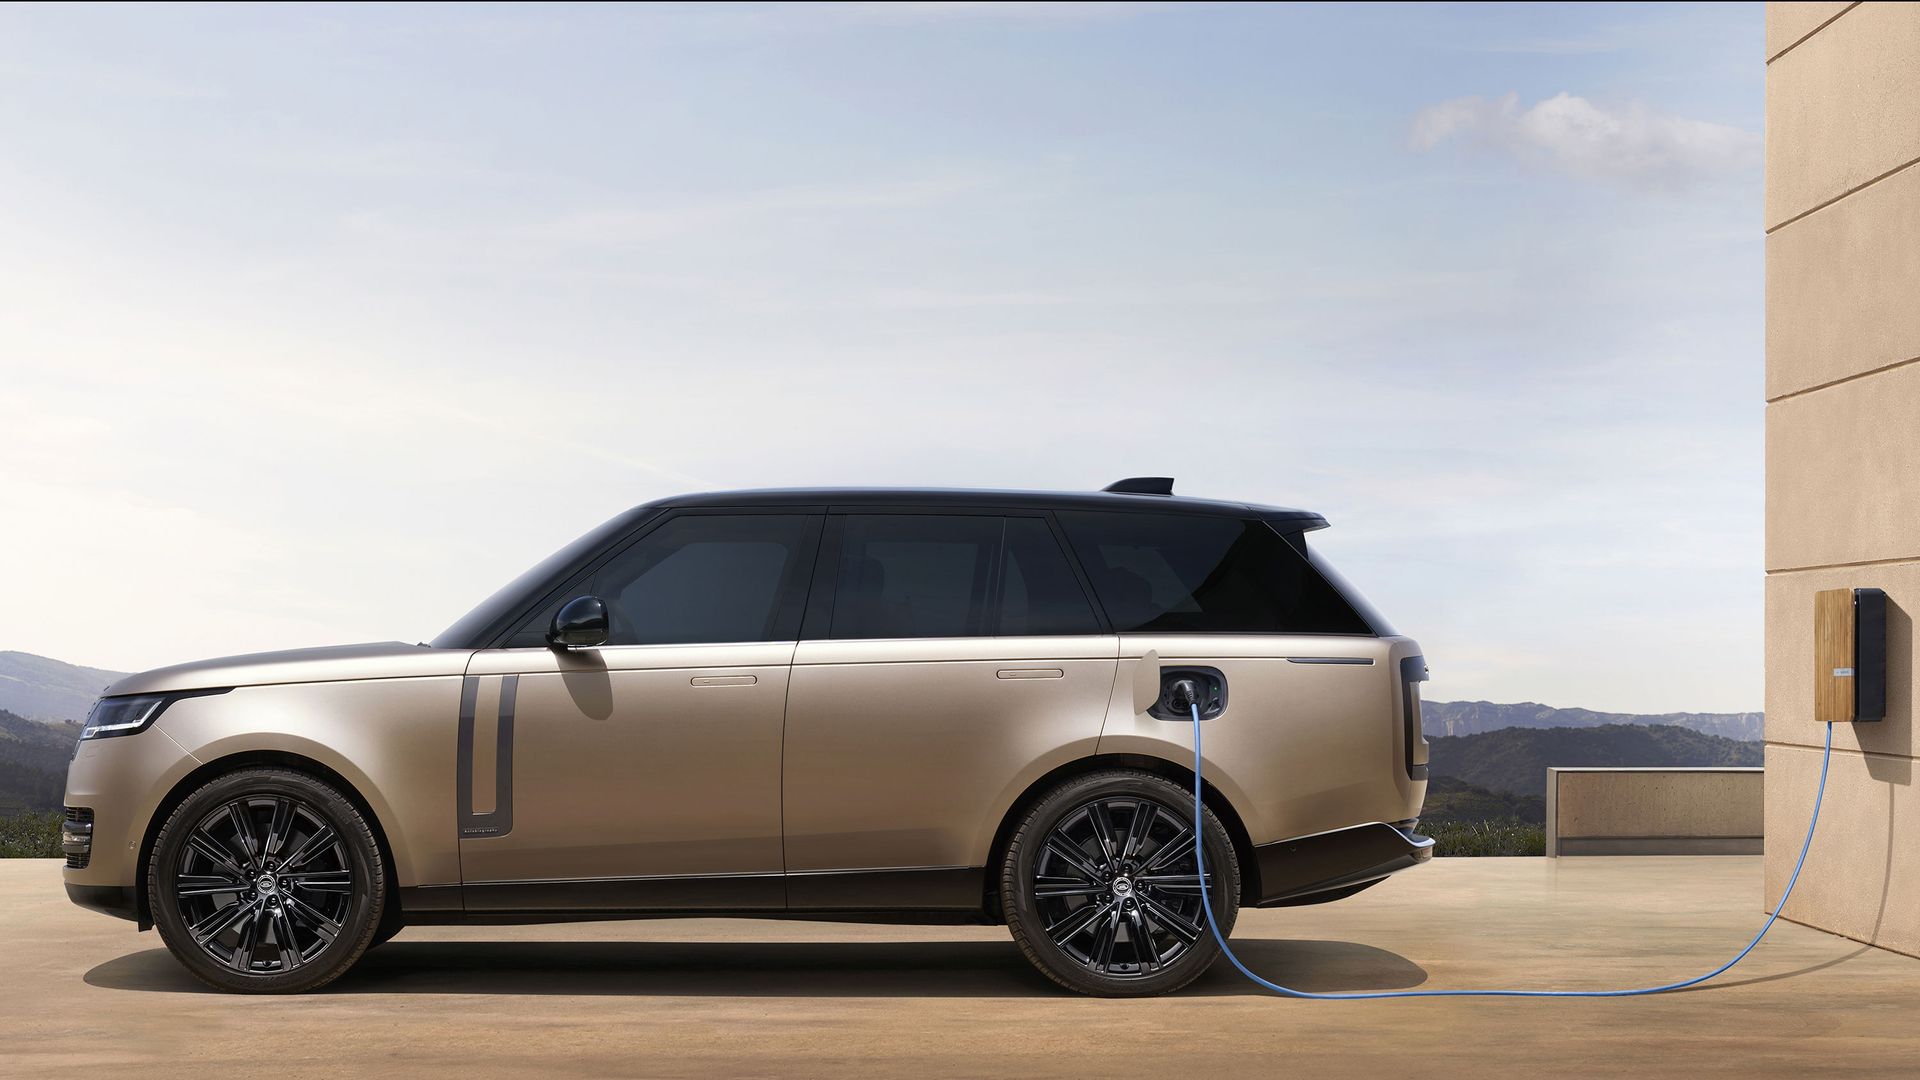 Range Rover will be first allelectric Land Rover, and it gets its